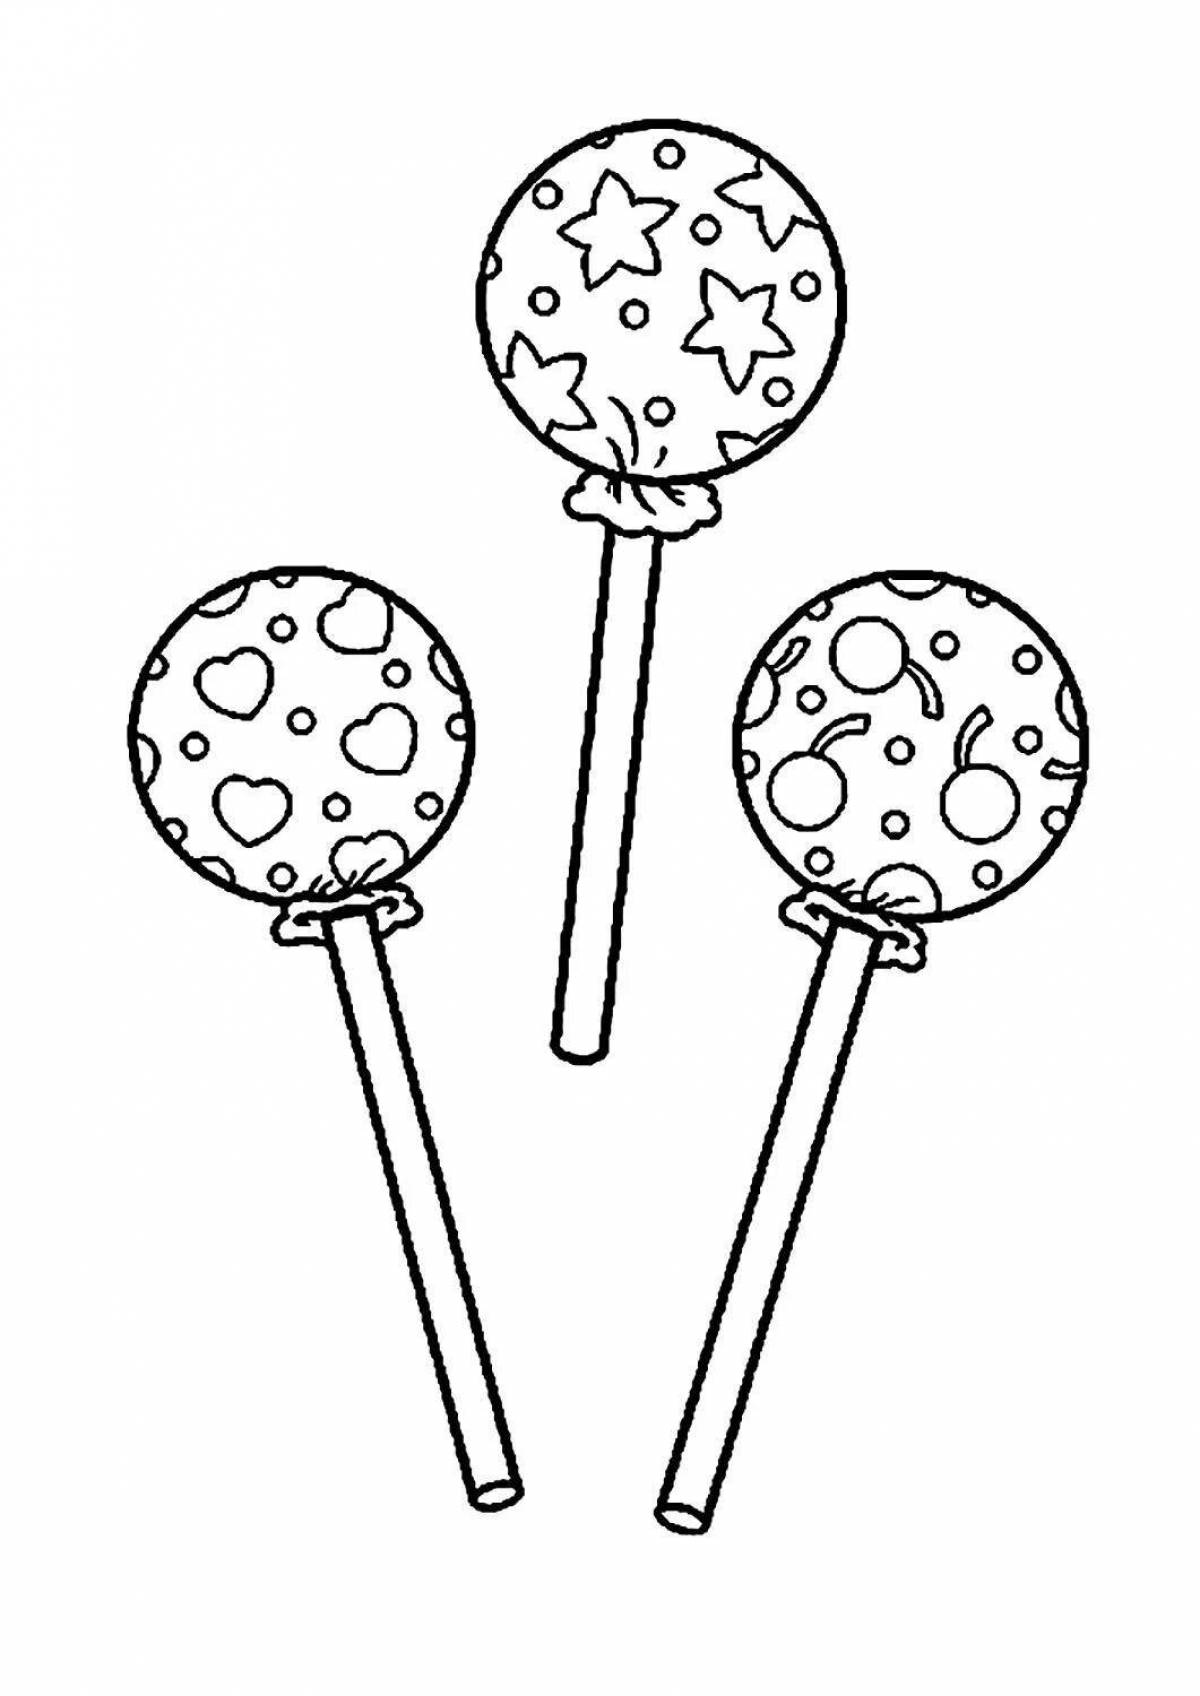 Chupik coloring page in color